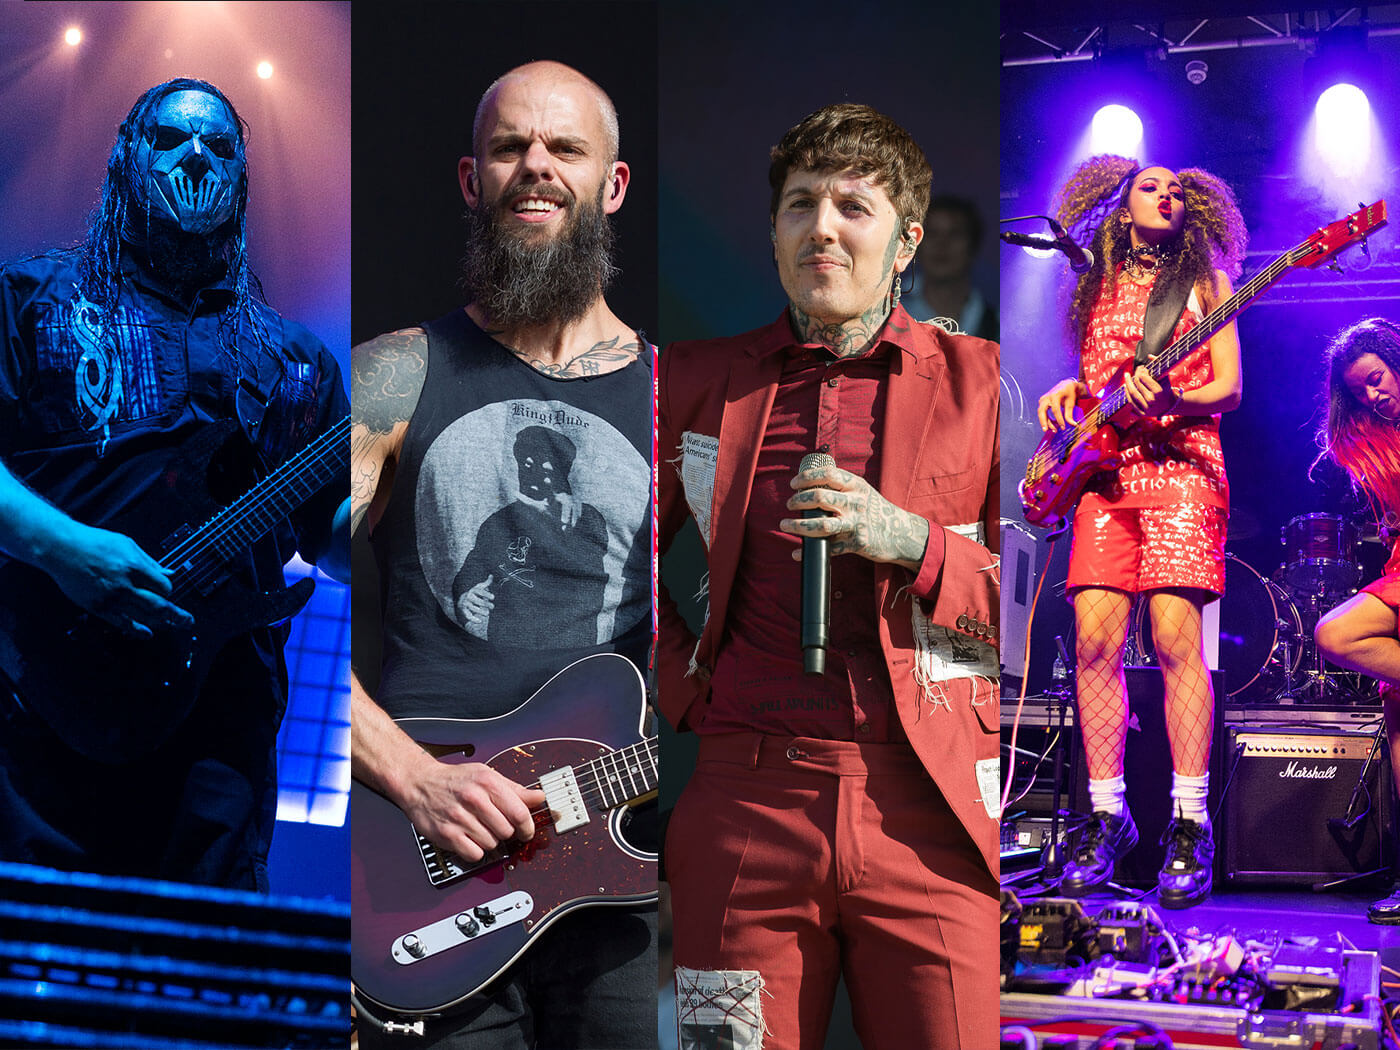 Winners of some of the Heavy Music Awards 2020